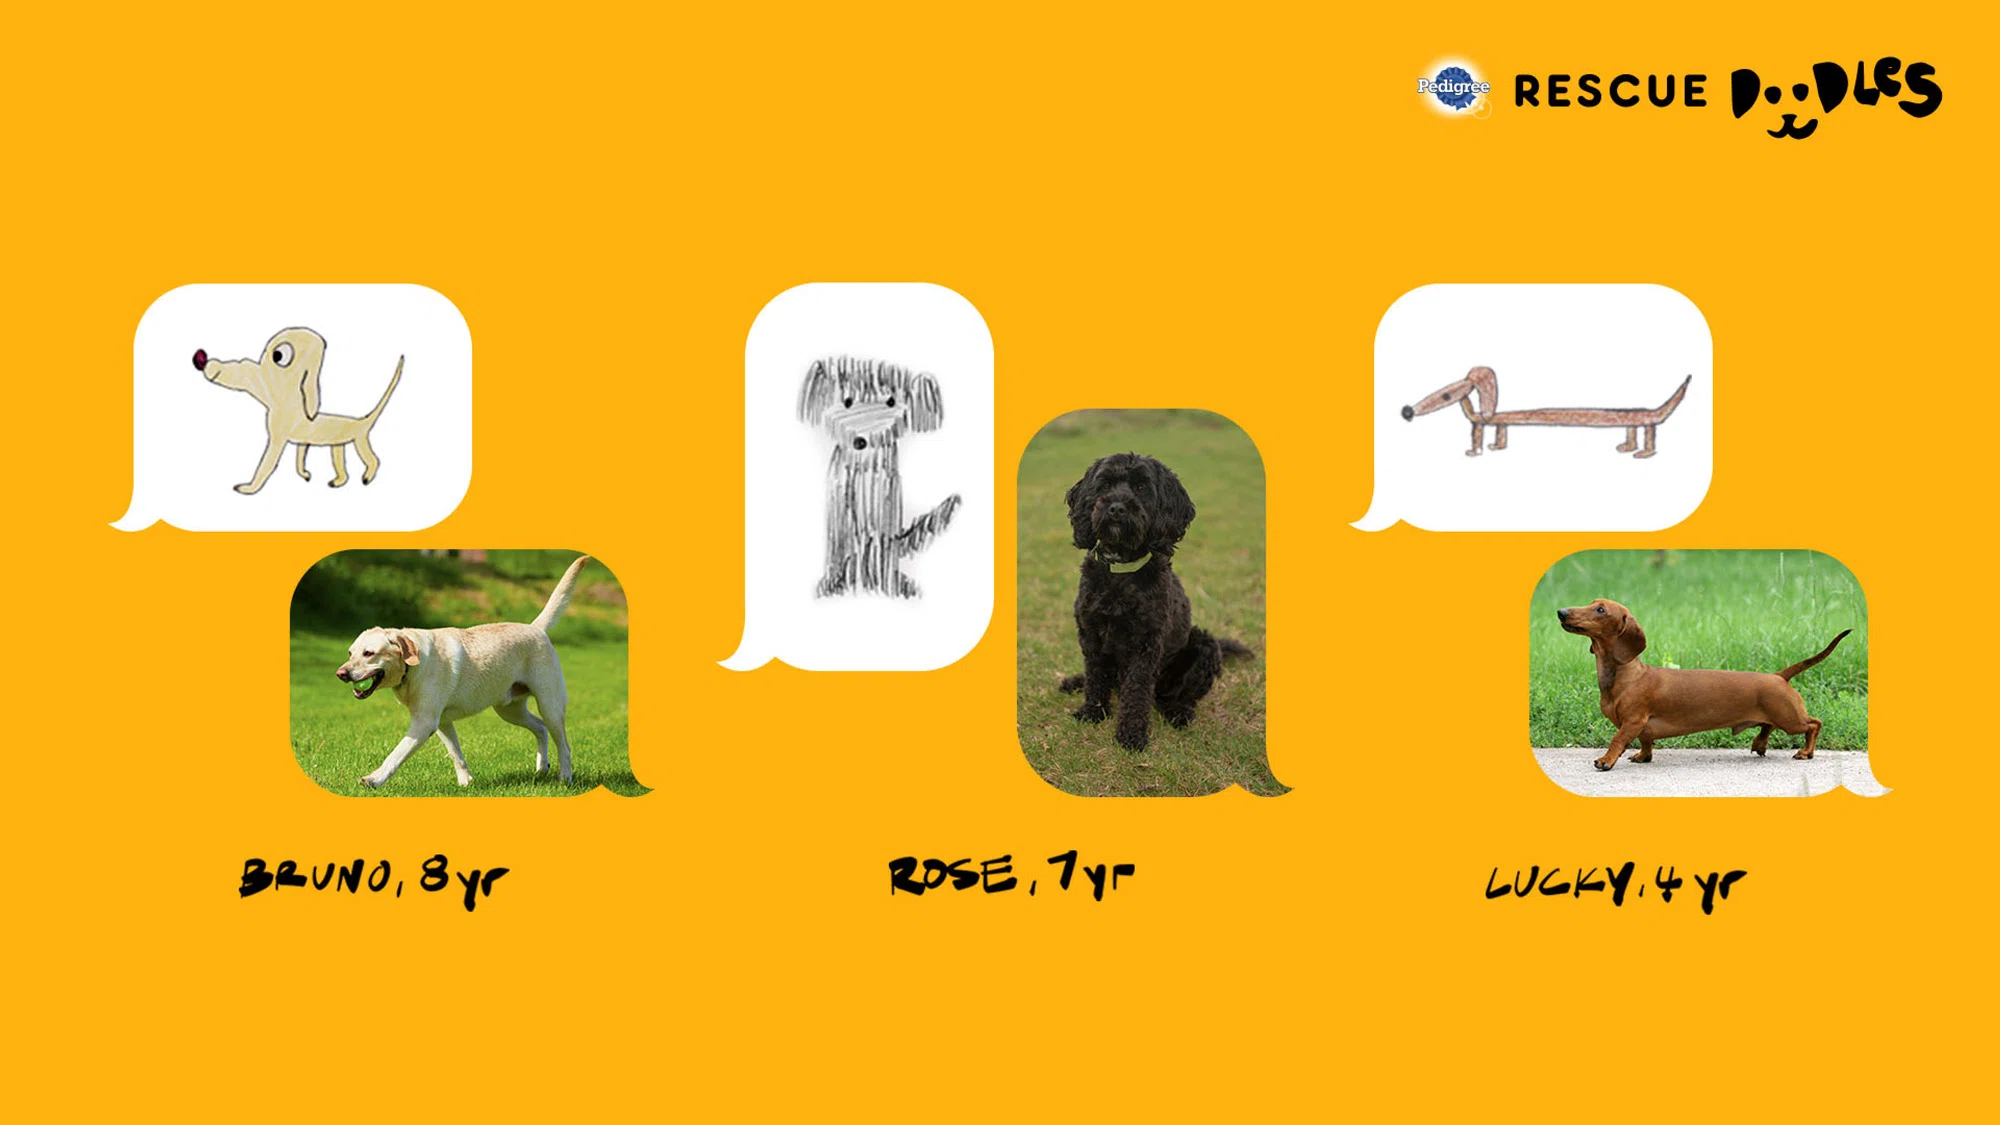 Pedigree's Rescue Doodles matches children's drawings with a nearby  adoptable dog